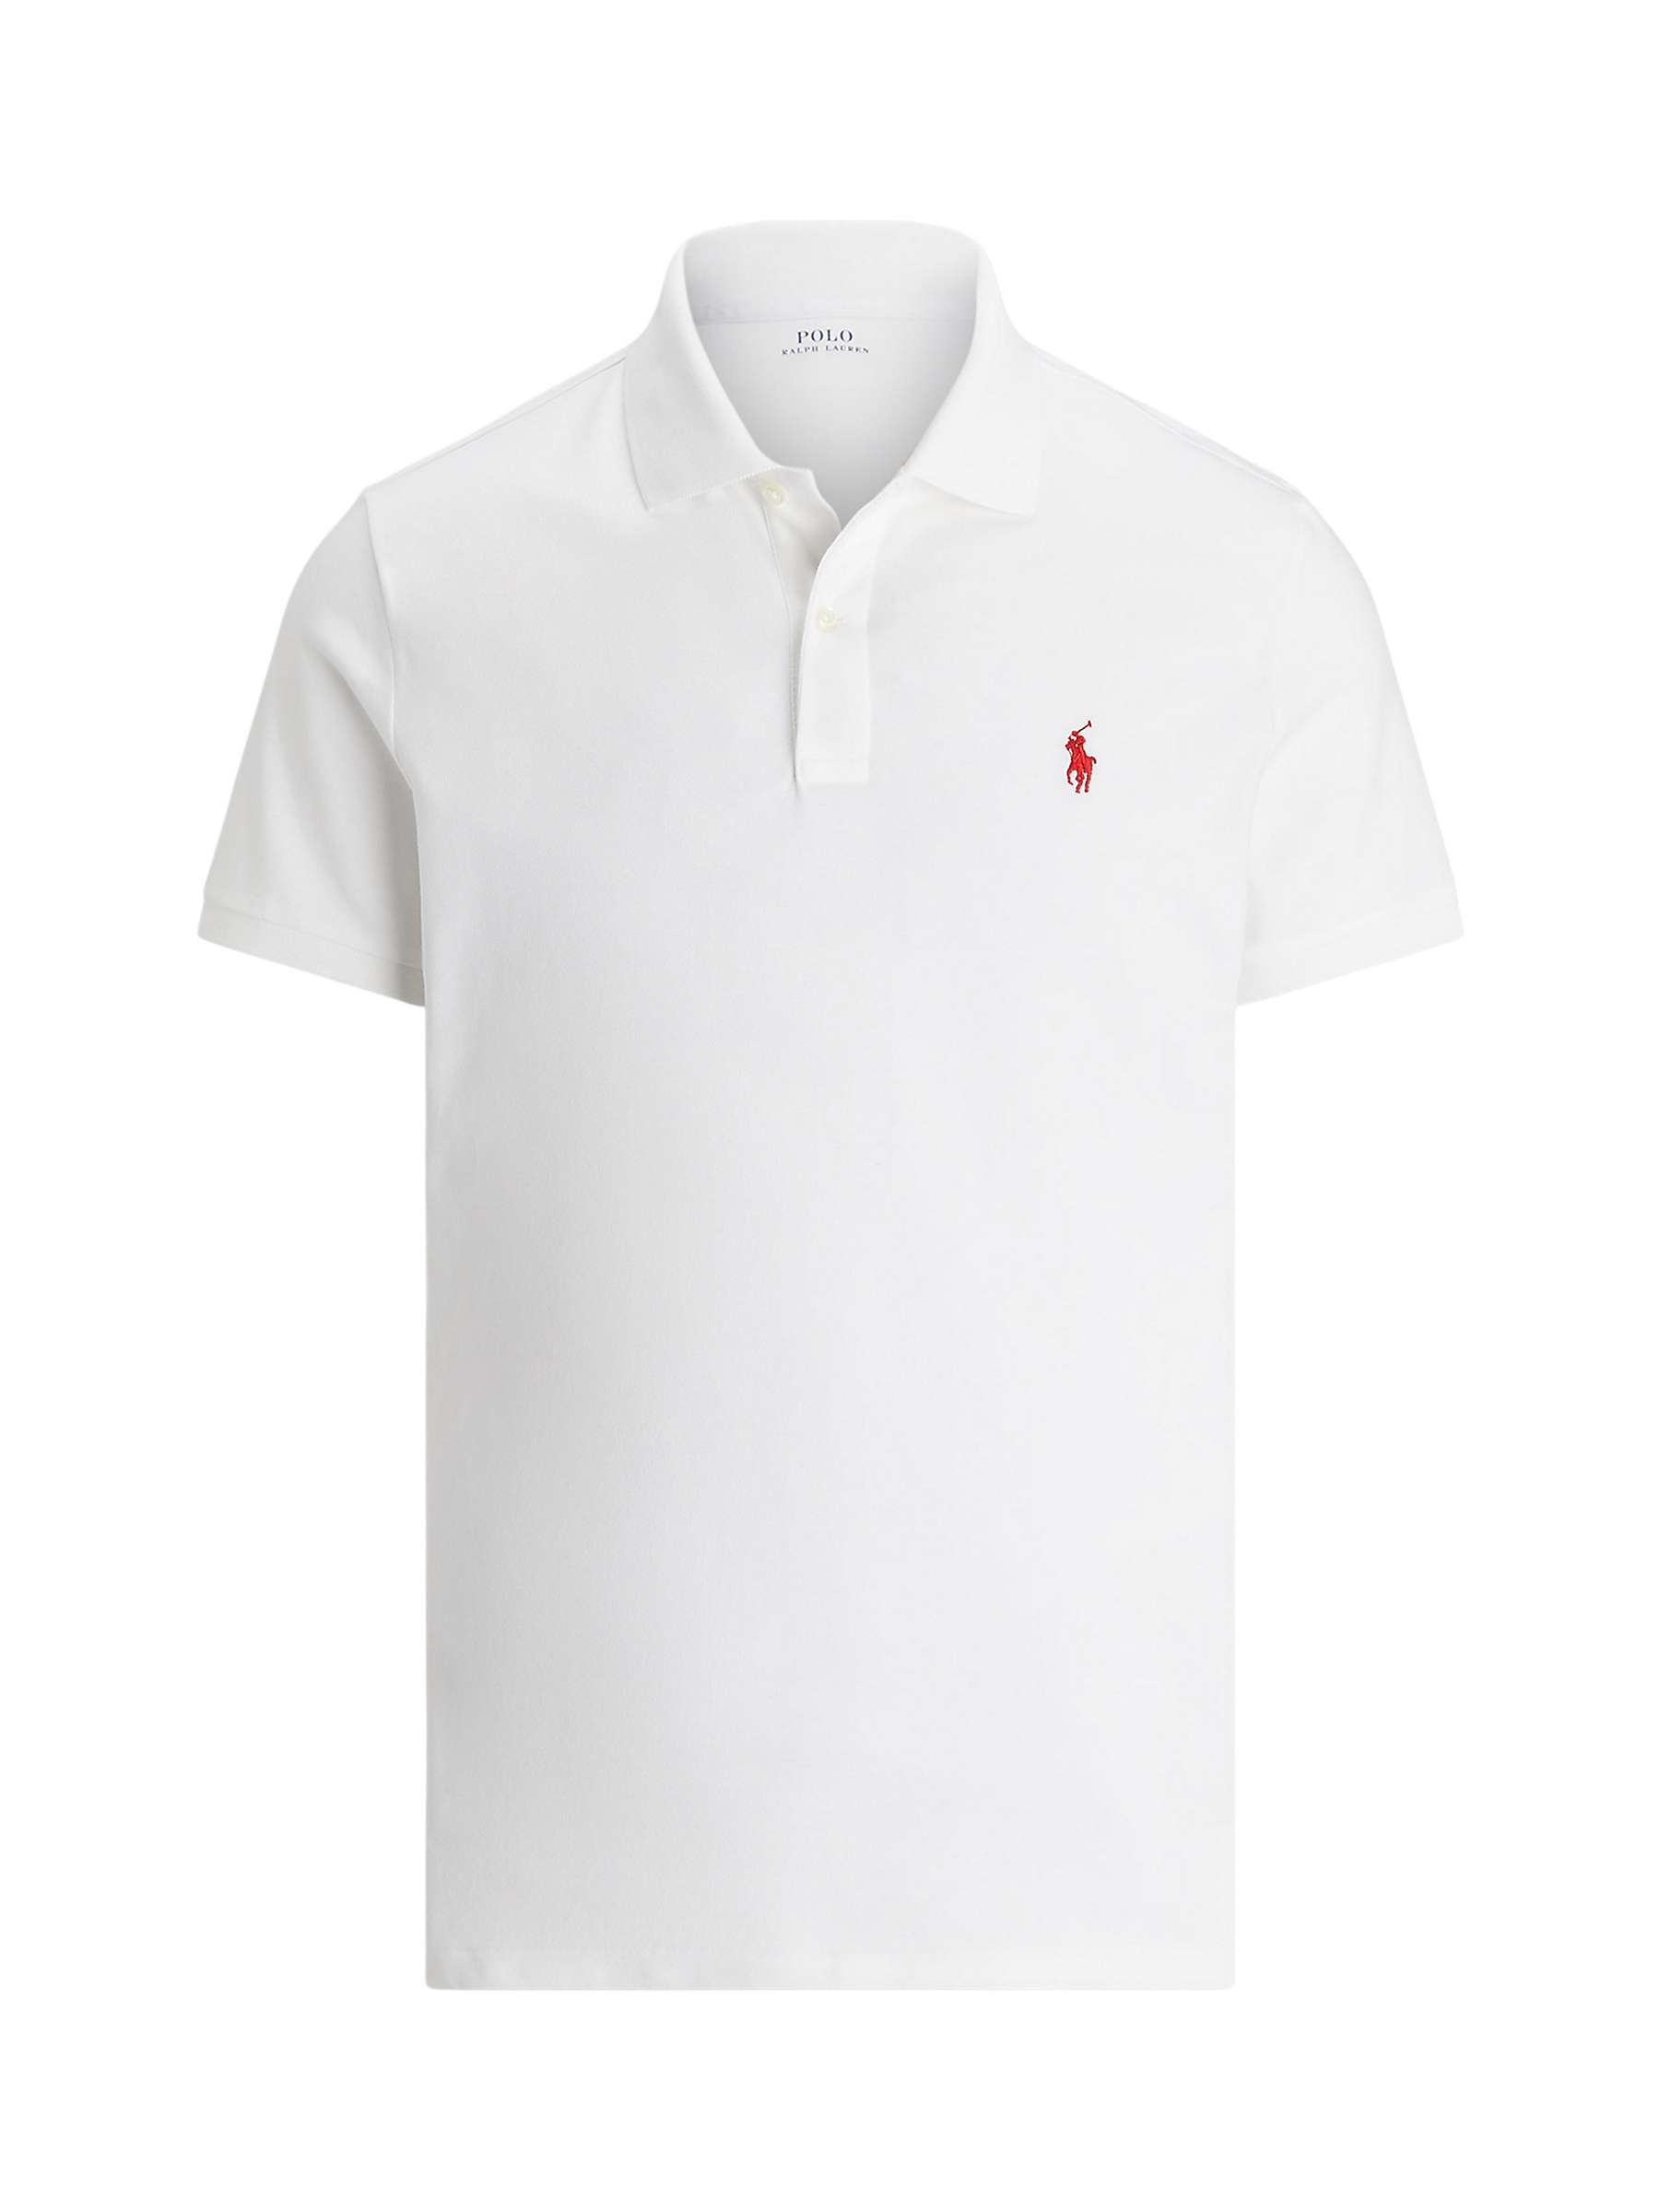 Buy Polo Golf Ralph Lauren Tailored Fit Performance Mesh Polo Shirt Online at johnlewis.com